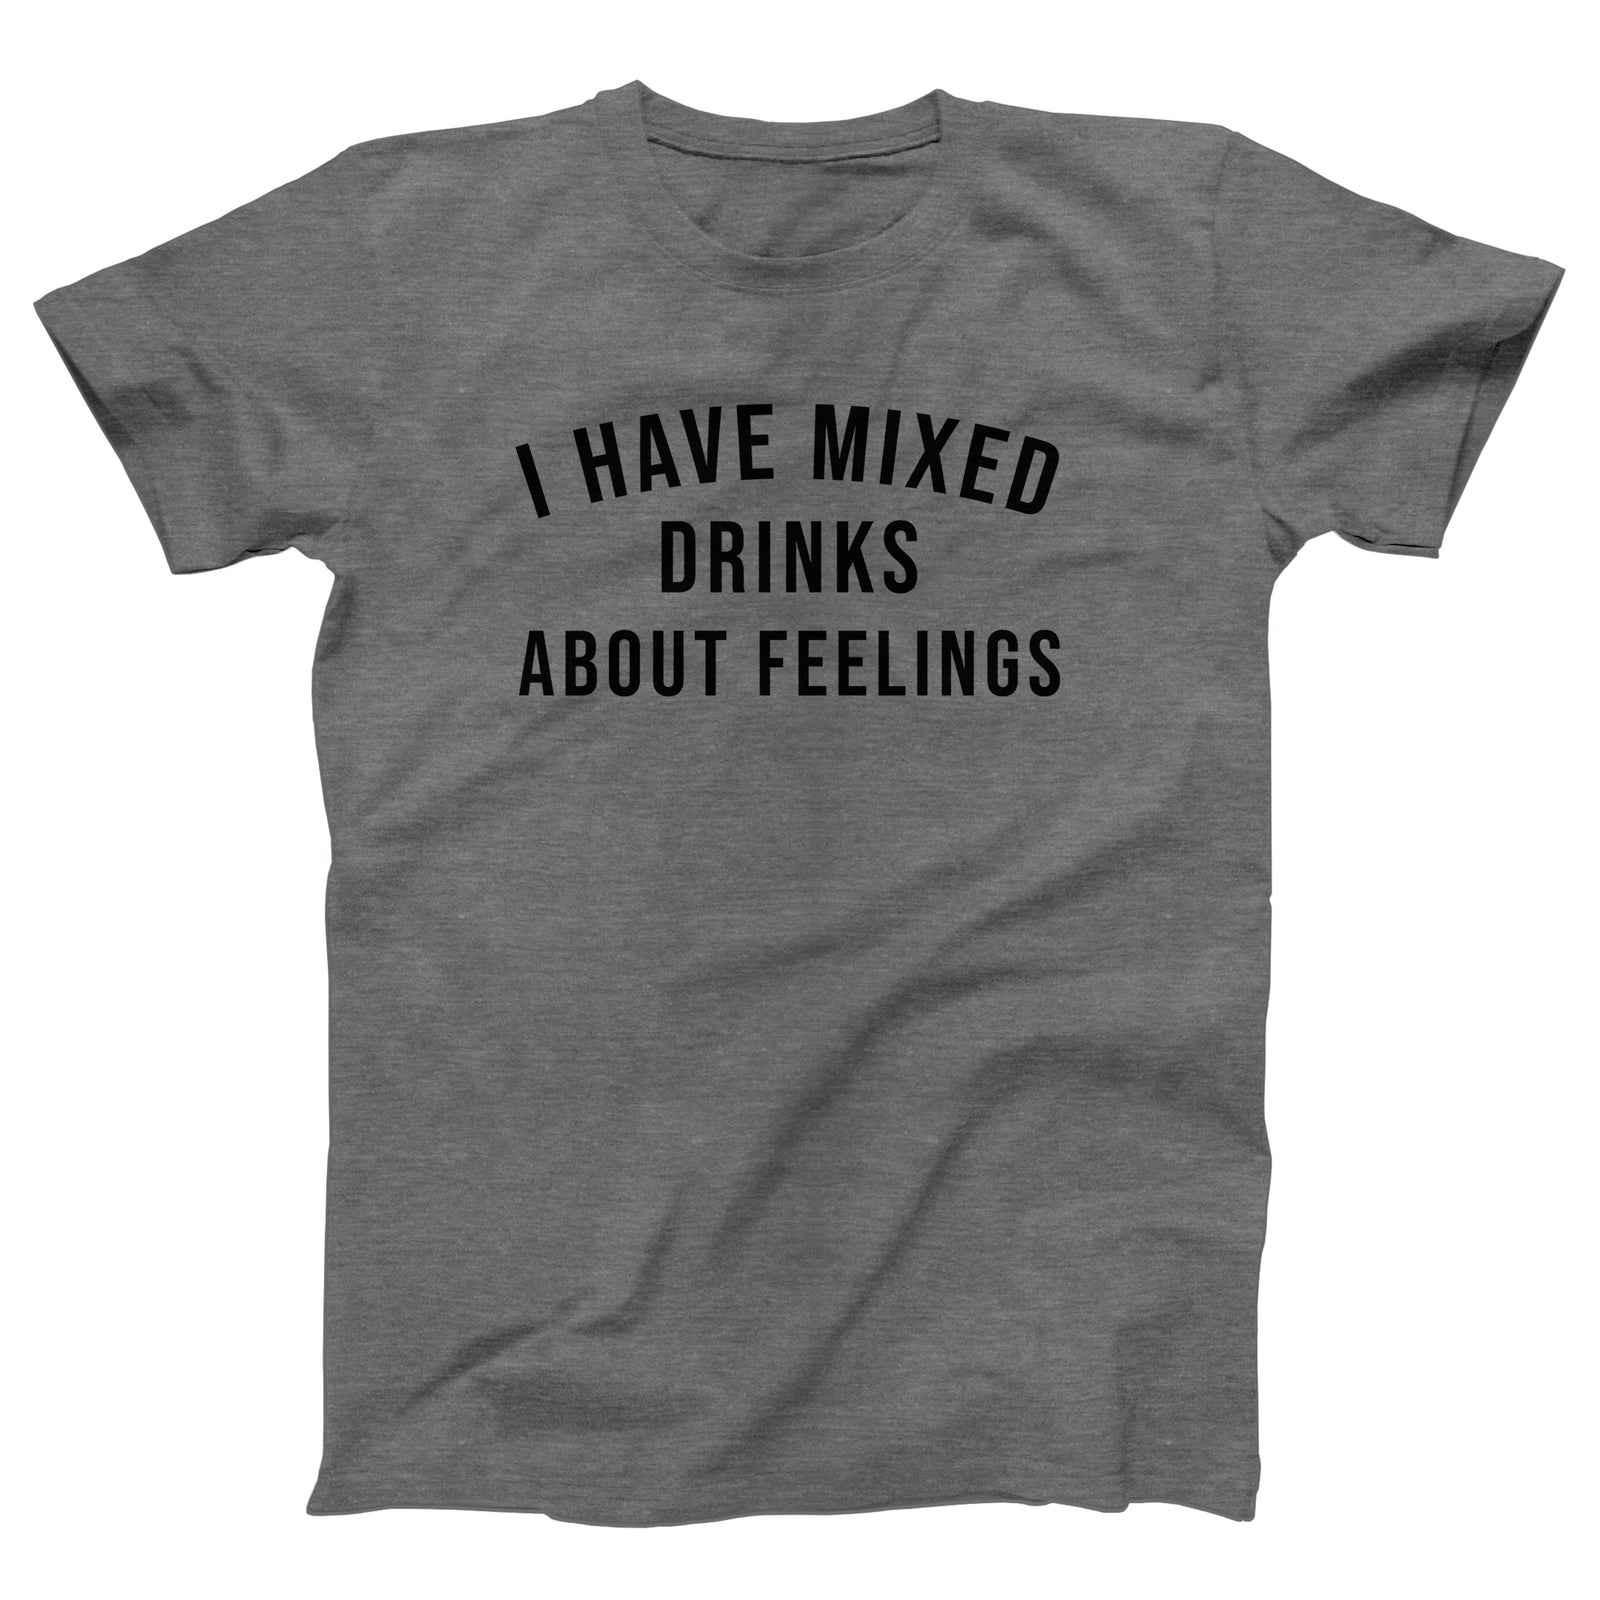 //cdn.shopify.com/s/files/1/0274/2488/2766/products/i-have-mixed-drinks-about-feelings-menunisex-t-shirt-658268_5000x.jpg?v=1630330764 5000w,
    //cdn.shopify.com/s/files/1/0274/2488/2766/products/i-have-mixed-drinks-about-feelings-menunisex-t-shirt-658268_4500x.jpg?v=1630330764 4500w,
    //cdn.shopify.com/s/files/1/0274/2488/2766/products/i-have-mixed-drinks-about-feelings-menunisex-t-shirt-658268_4000x.jpg?v=1630330764 4000w,
    //cdn.shopify.com/s/files/1/0274/2488/2766/products/i-have-mixed-drinks-about-feelings-menunisex-t-shirt-658268_3500x.jpg?v=1630330764 3500w,
    //cdn.shopify.com/s/files/1/0274/2488/2766/products/i-have-mixed-drinks-about-feelings-menunisex-t-shirt-658268_3000x.jpg?v=1630330764 3000w,
    //cdn.shopify.com/s/files/1/0274/2488/2766/products/i-have-mixed-drinks-about-feelings-menunisex-t-shirt-658268_2500x.jpg?v=1630330764 2500w,
    //cdn.shopify.com/s/files/1/0274/2488/2766/products/i-have-mixed-drinks-about-feelings-menunisex-t-shirt-658268_2000x.jpg?v=1630330764 2000w,
    //cdn.shopify.com/s/files/1/0274/2488/2766/products/i-have-mixed-drinks-about-feelings-menunisex-t-shirt-658268_1800x.jpg?v=1630330764 1800w,
    //cdn.shopify.com/s/files/1/0274/2488/2766/products/i-have-mixed-drinks-about-feelings-menunisex-t-shirt-658268_1600x.jpg?v=1630330764 1600w,
    //cdn.shopify.com/s/files/1/0274/2488/2766/products/i-have-mixed-drinks-about-feelings-menunisex-t-shirt-658268_1400x.jpg?v=1630330764 1400w,
    //cdn.shopify.com/s/files/1/0274/2488/2766/products/i-have-mixed-drinks-about-feelings-menunisex-t-shirt-658268_1200x.jpg?v=1630330764 1200w,
    //cdn.shopify.com/s/files/1/0274/2488/2766/products/i-have-mixed-drinks-about-feelings-menunisex-t-shirt-658268_1000x.jpg?v=1630330764 1000w,
    //cdn.shopify.com/s/files/1/0274/2488/2766/products/i-have-mixed-drinks-about-feelings-menunisex-t-shirt-658268_800x.jpg?v=1630330764 800w,
    //cdn.shopify.com/s/files/1/0274/2488/2766/products/i-have-mixed-drinks-about-feelings-menunisex-t-shirt-658268_600x.jpg?v=1630330764 600w,
    //cdn.shopify.com/s/files/1/0274/2488/2766/products/i-have-mixed-drinks-about-feelings-menunisex-t-shirt-658268_400x.jpg?v=1630330764 400w,
    //cdn.shopify.com/s/files/1/0274/2488/2766/products/i-have-mixed-drinks-about-feelings-menunisex-t-shirt-658268_200x.jpg?v=1630330764 200w